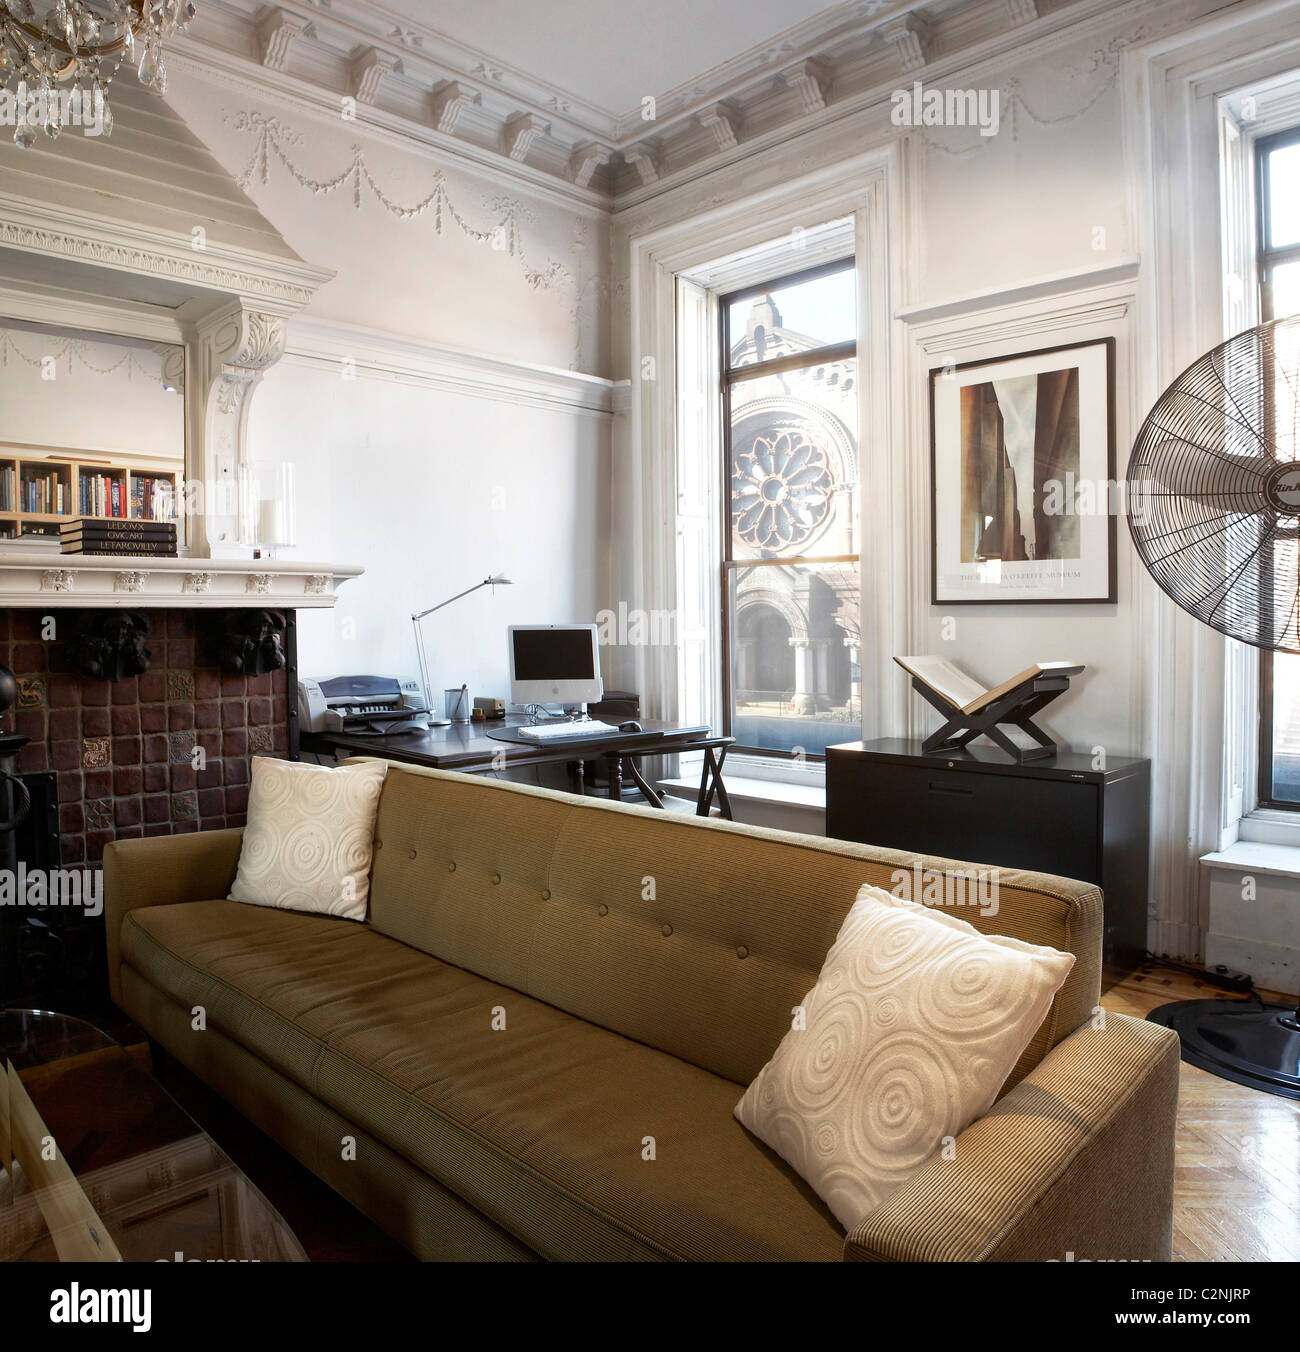 Brooklyn brownstone interior moulded ceiling, overmantel and large sofa Stock Photo